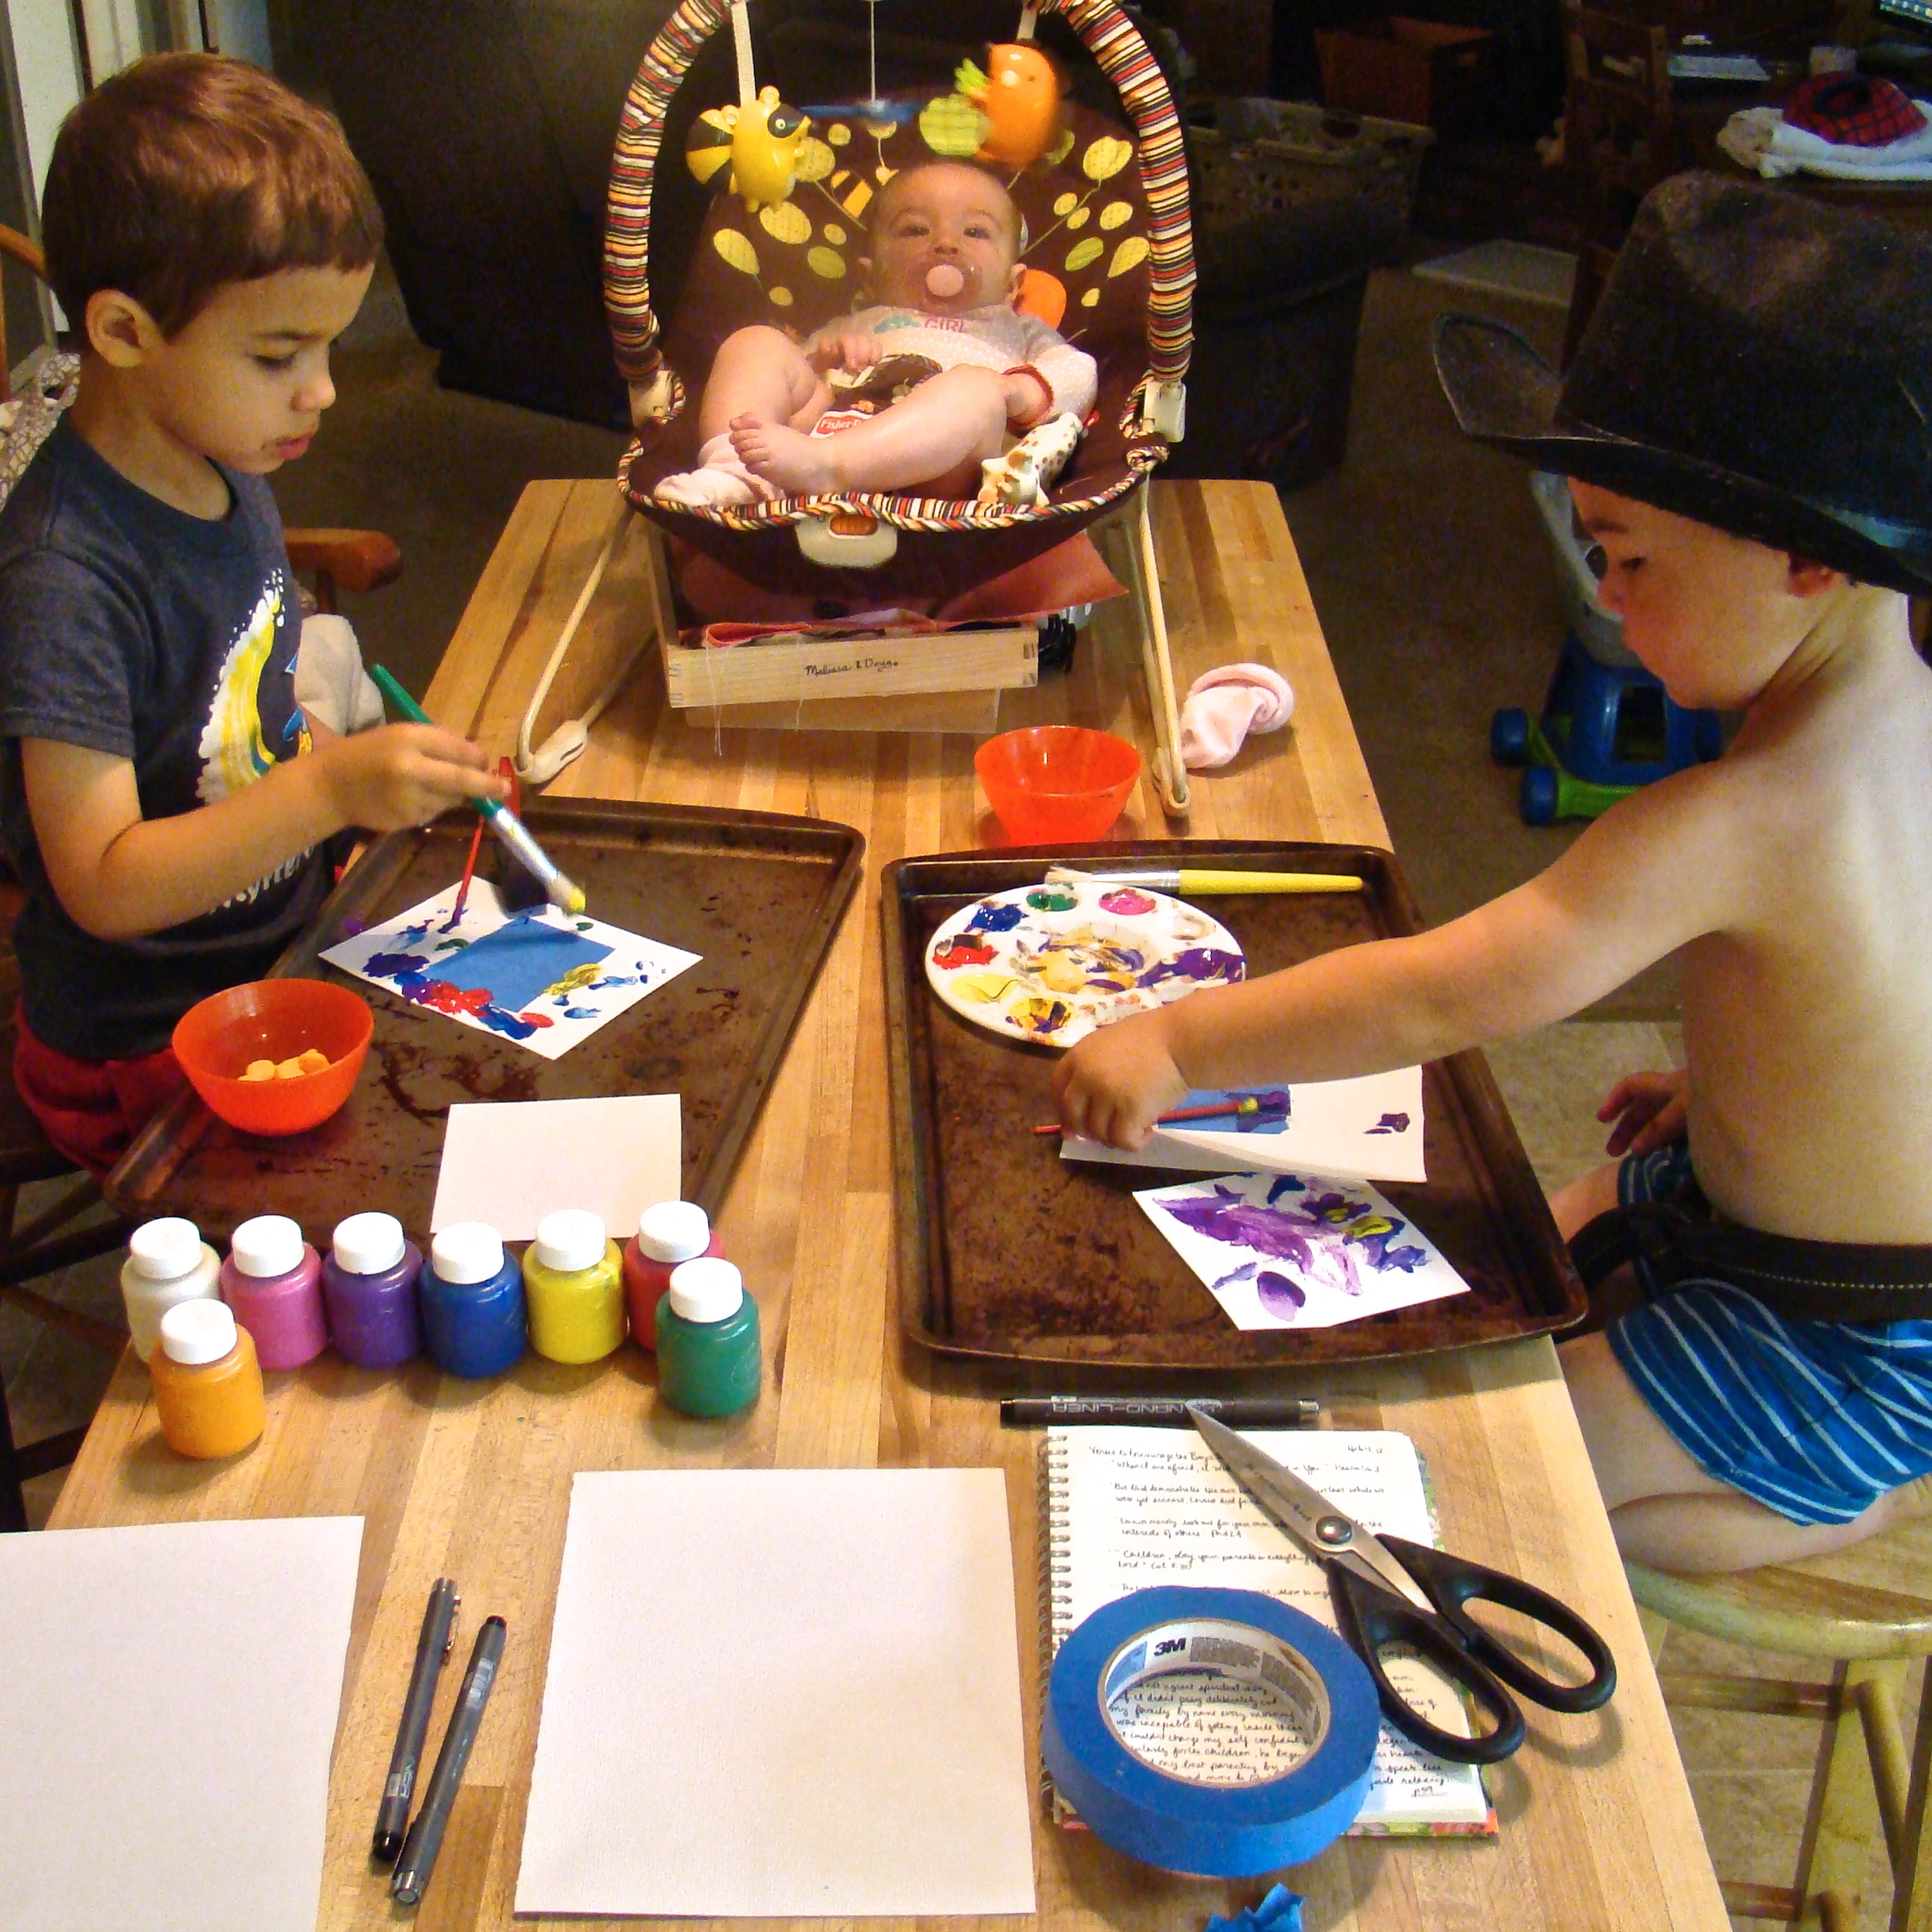 Scripture Painting Activity for Young Children